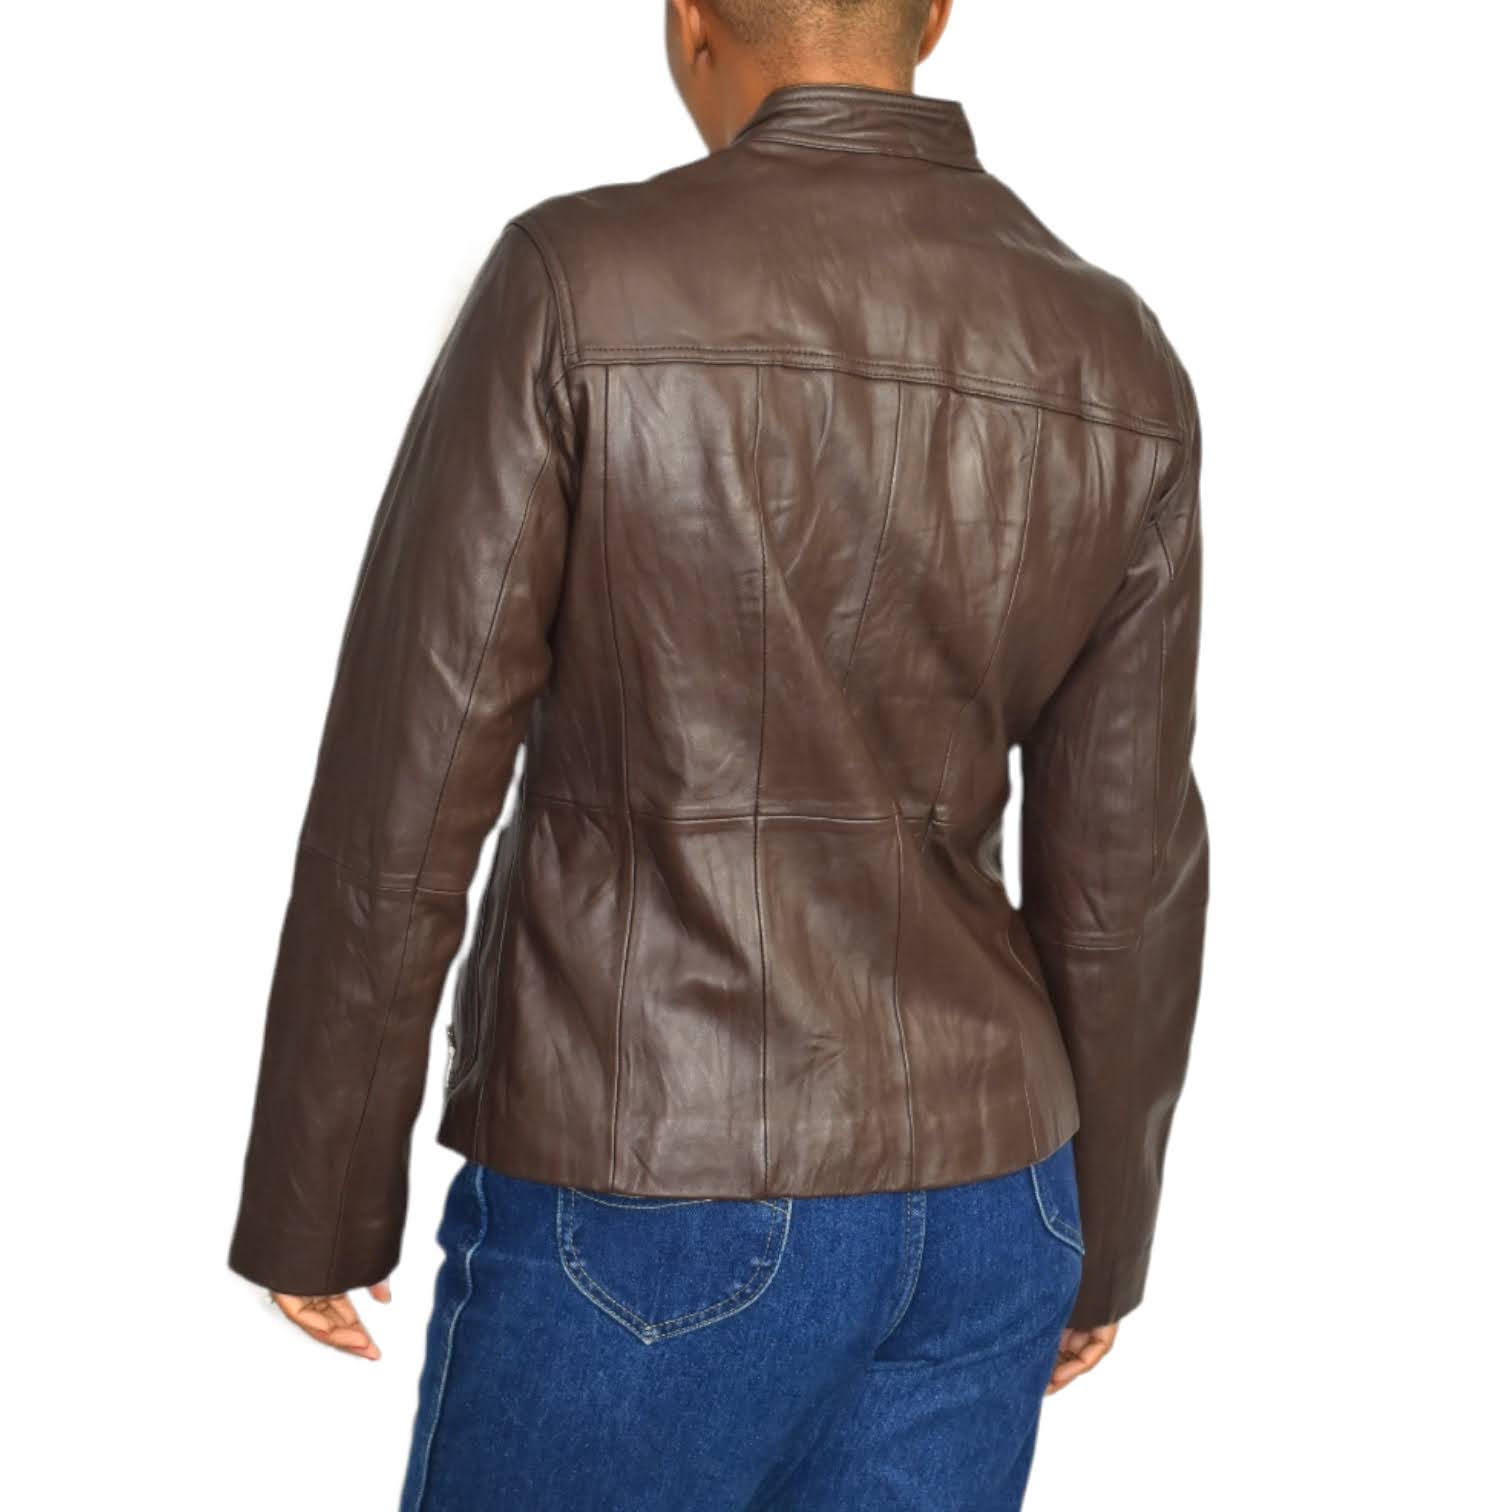 Chico's Davita Brown Leather Jacket Size Small